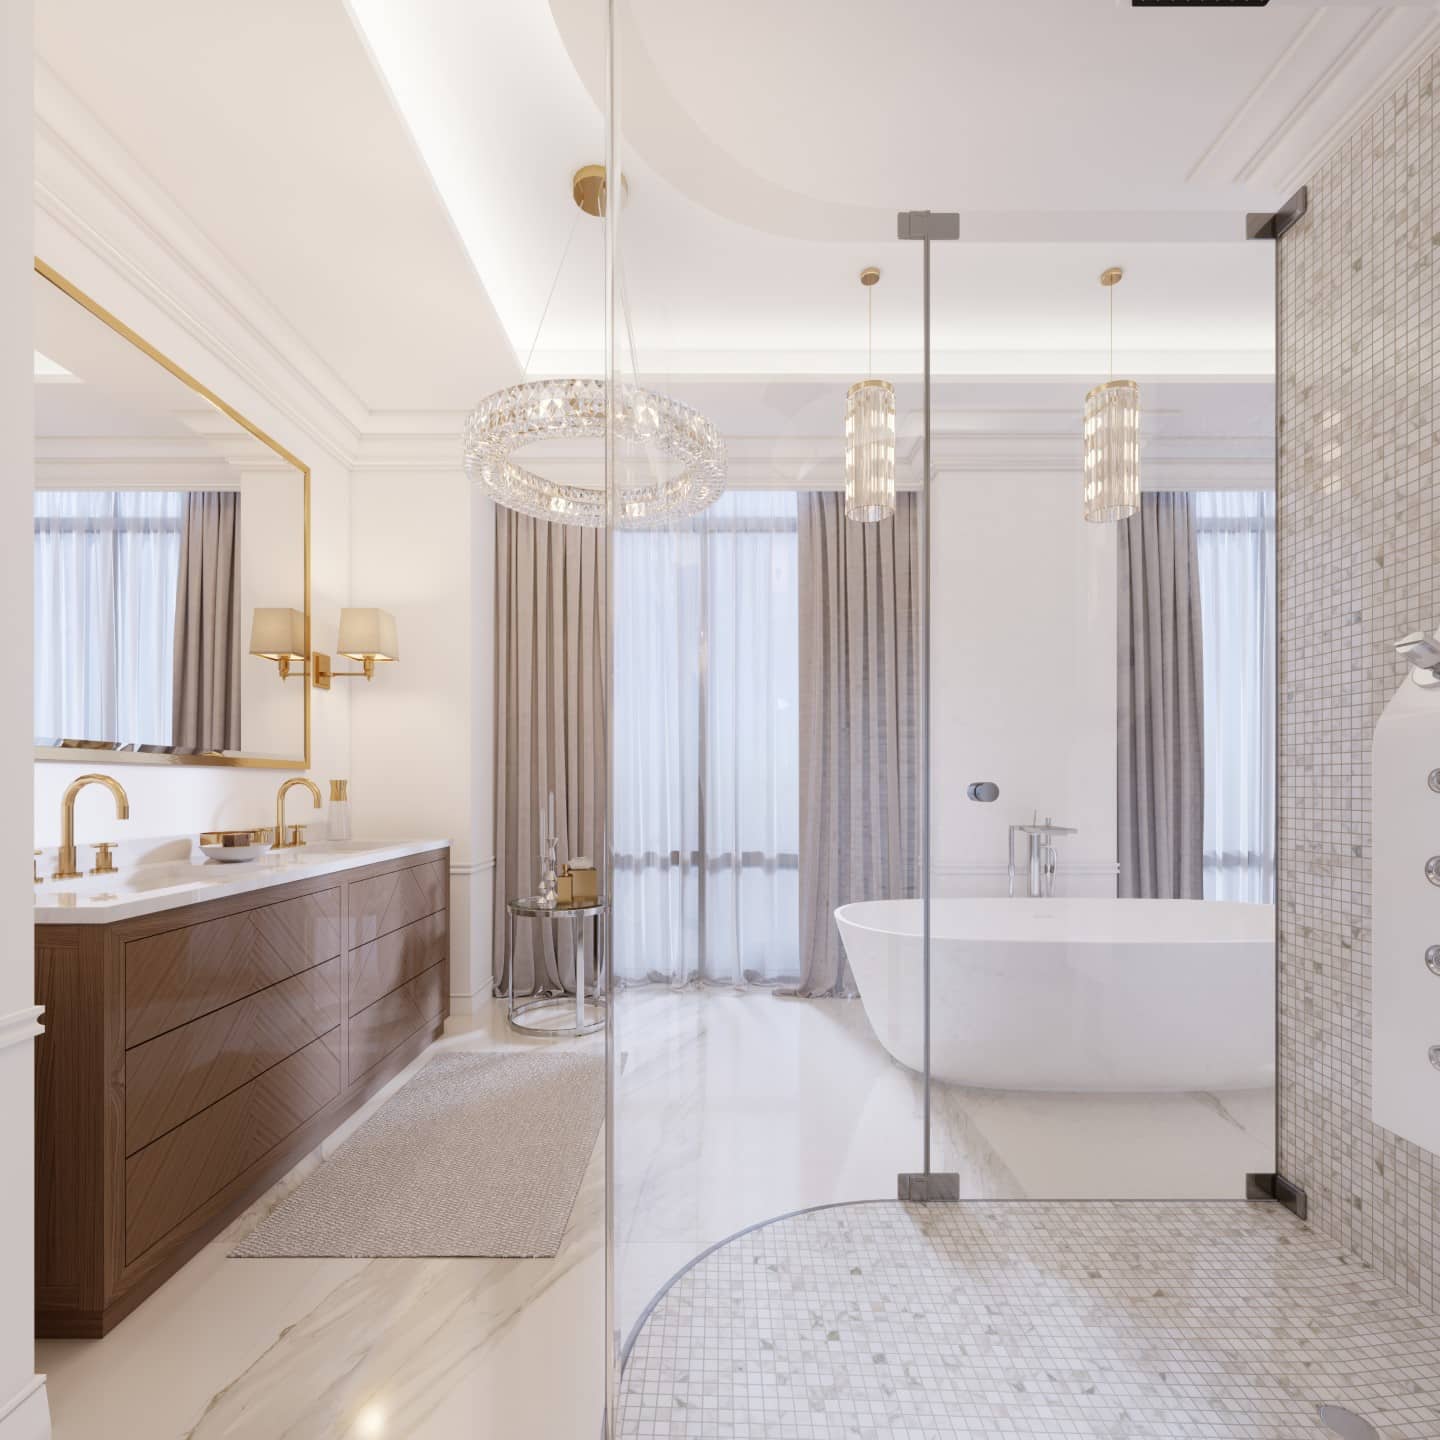 Modern bathroom with vanity and a mirror in a gold frame with sc